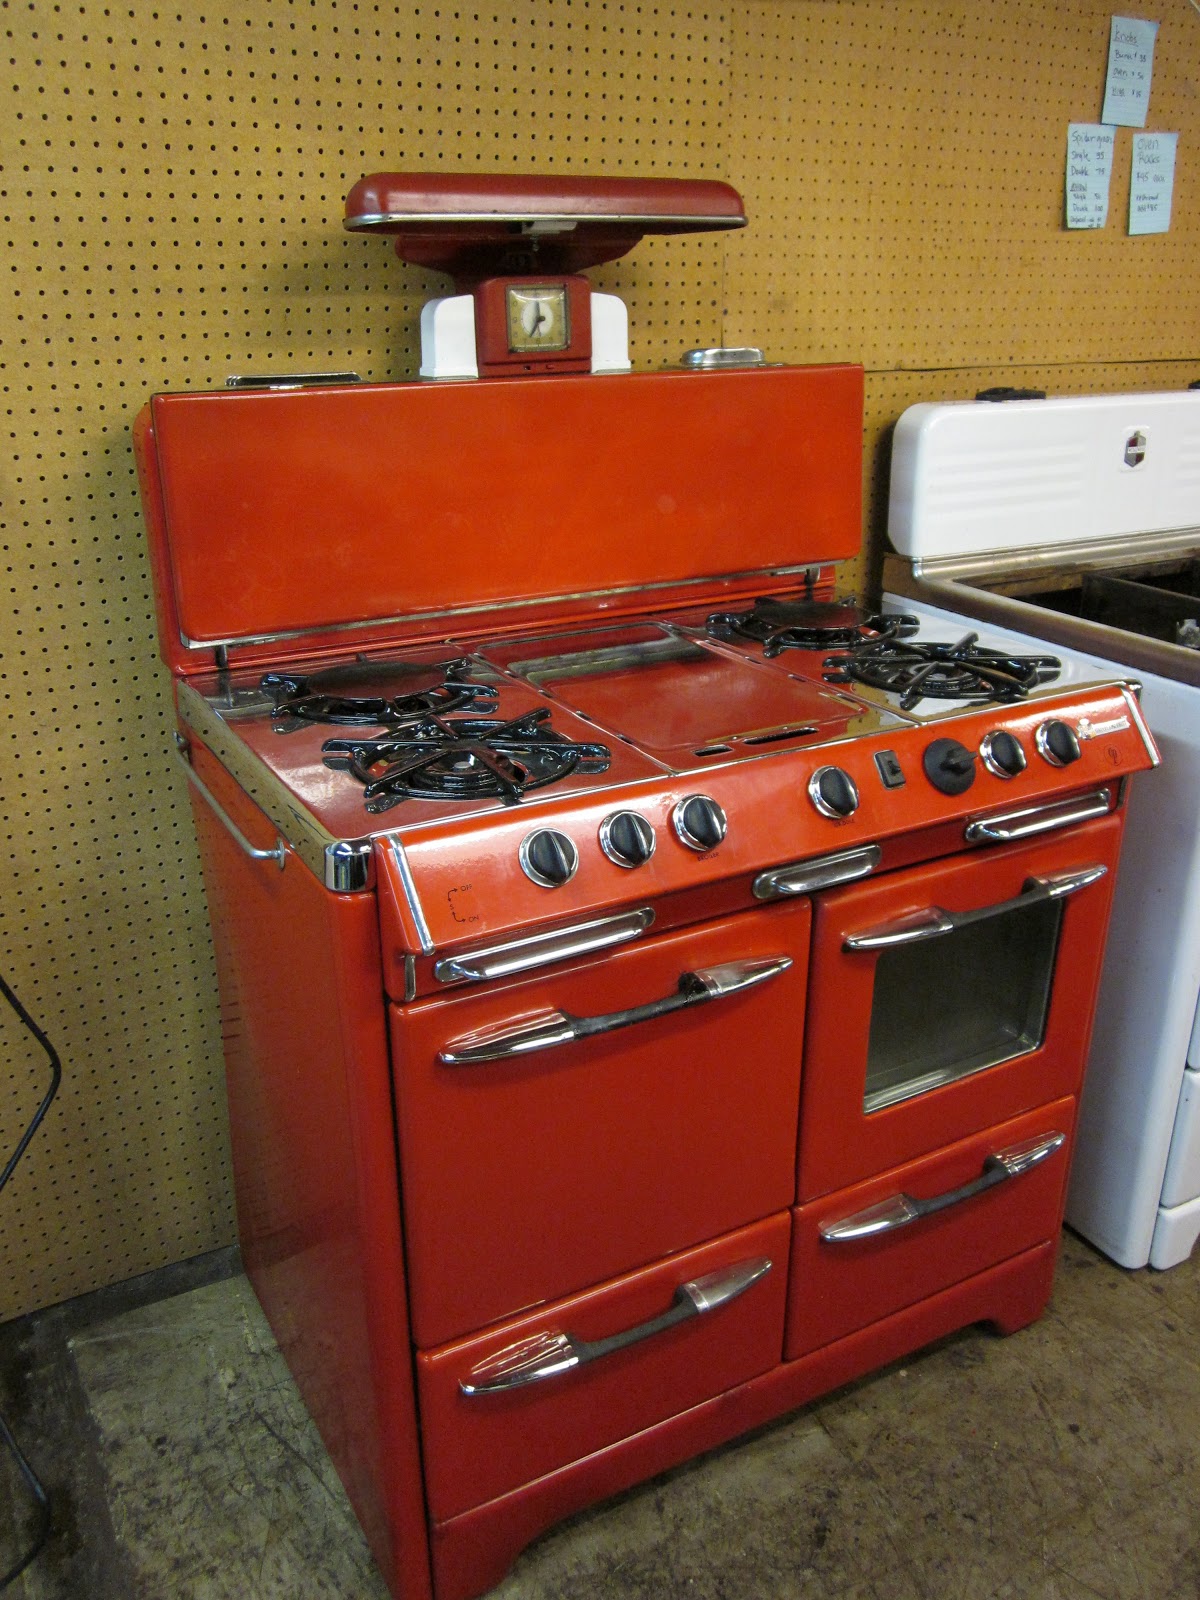 Rescuing antique stoves one at a time: New red O'keefe & Merritt